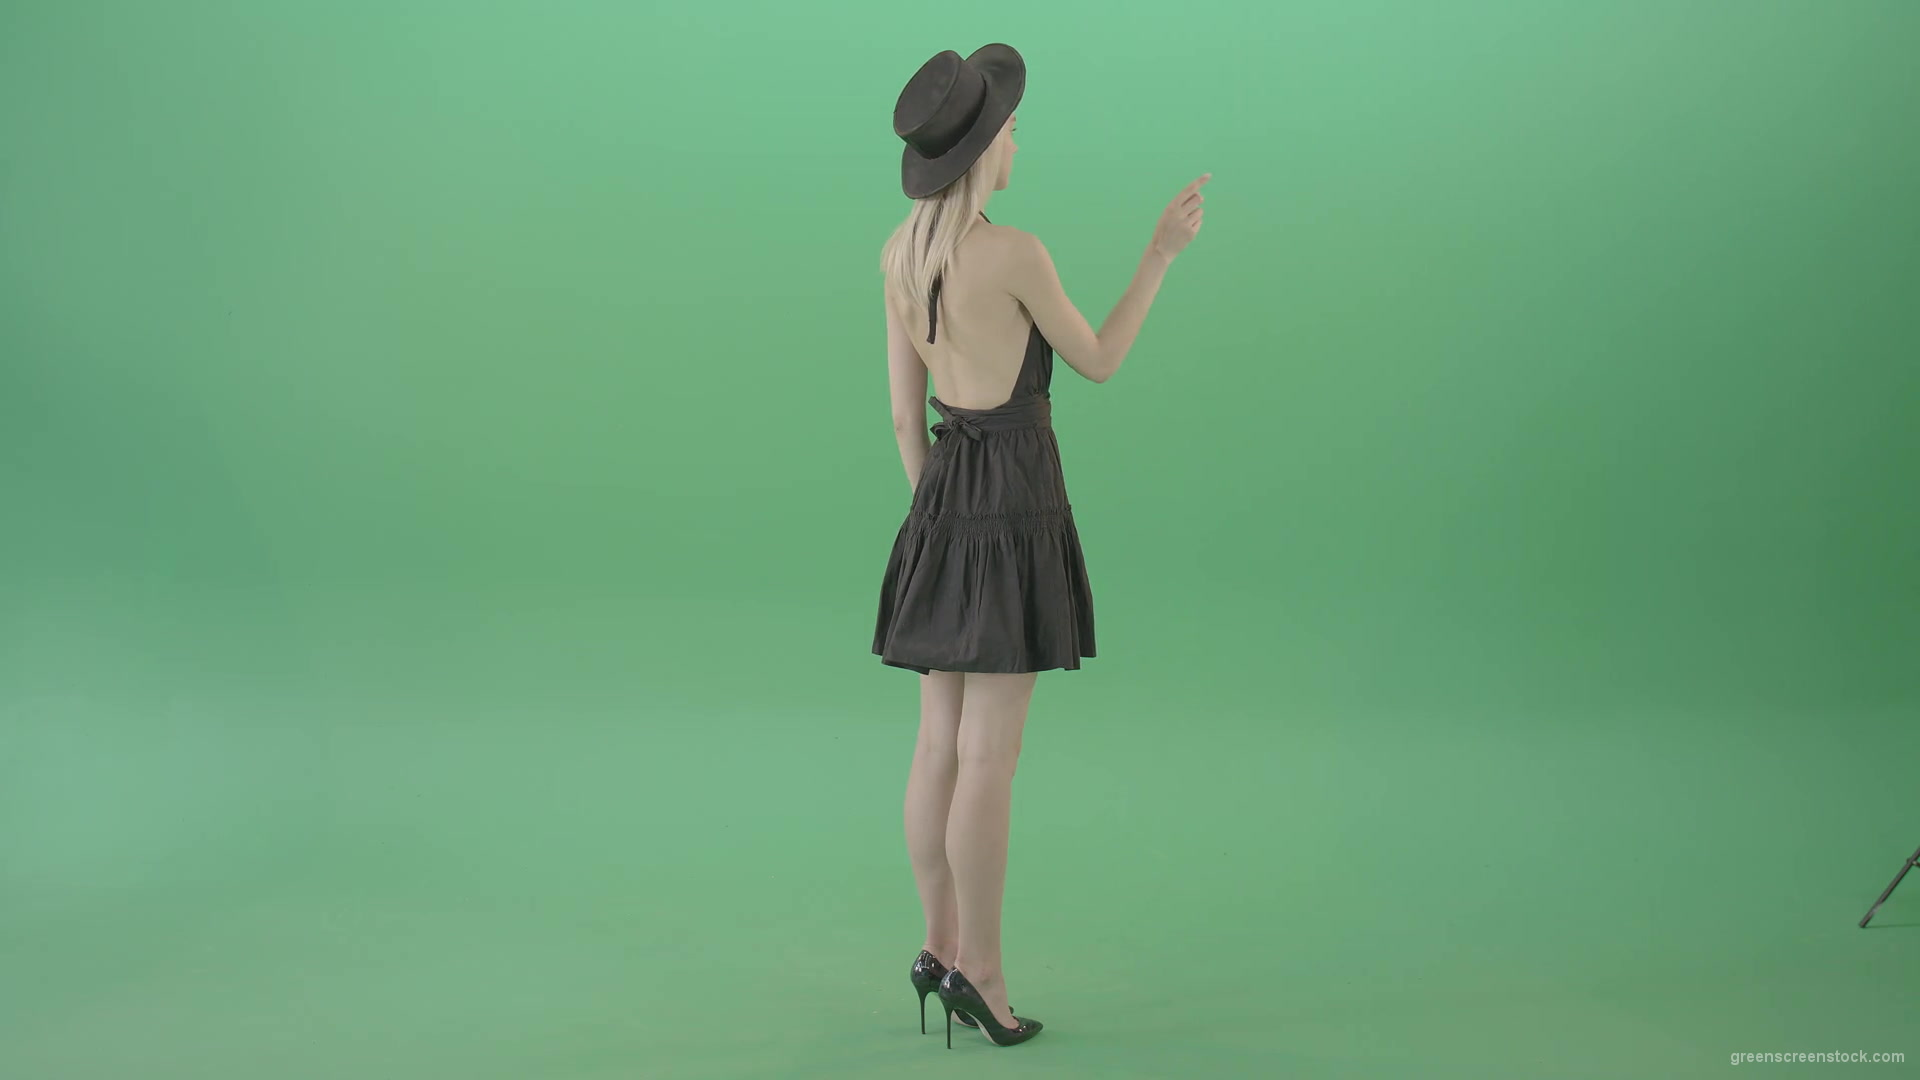 Full-size-fashion-girl-looking-virtual-products-on-touch-green-screen-4K-Video-Footage-1920_005 Green Screen Stock